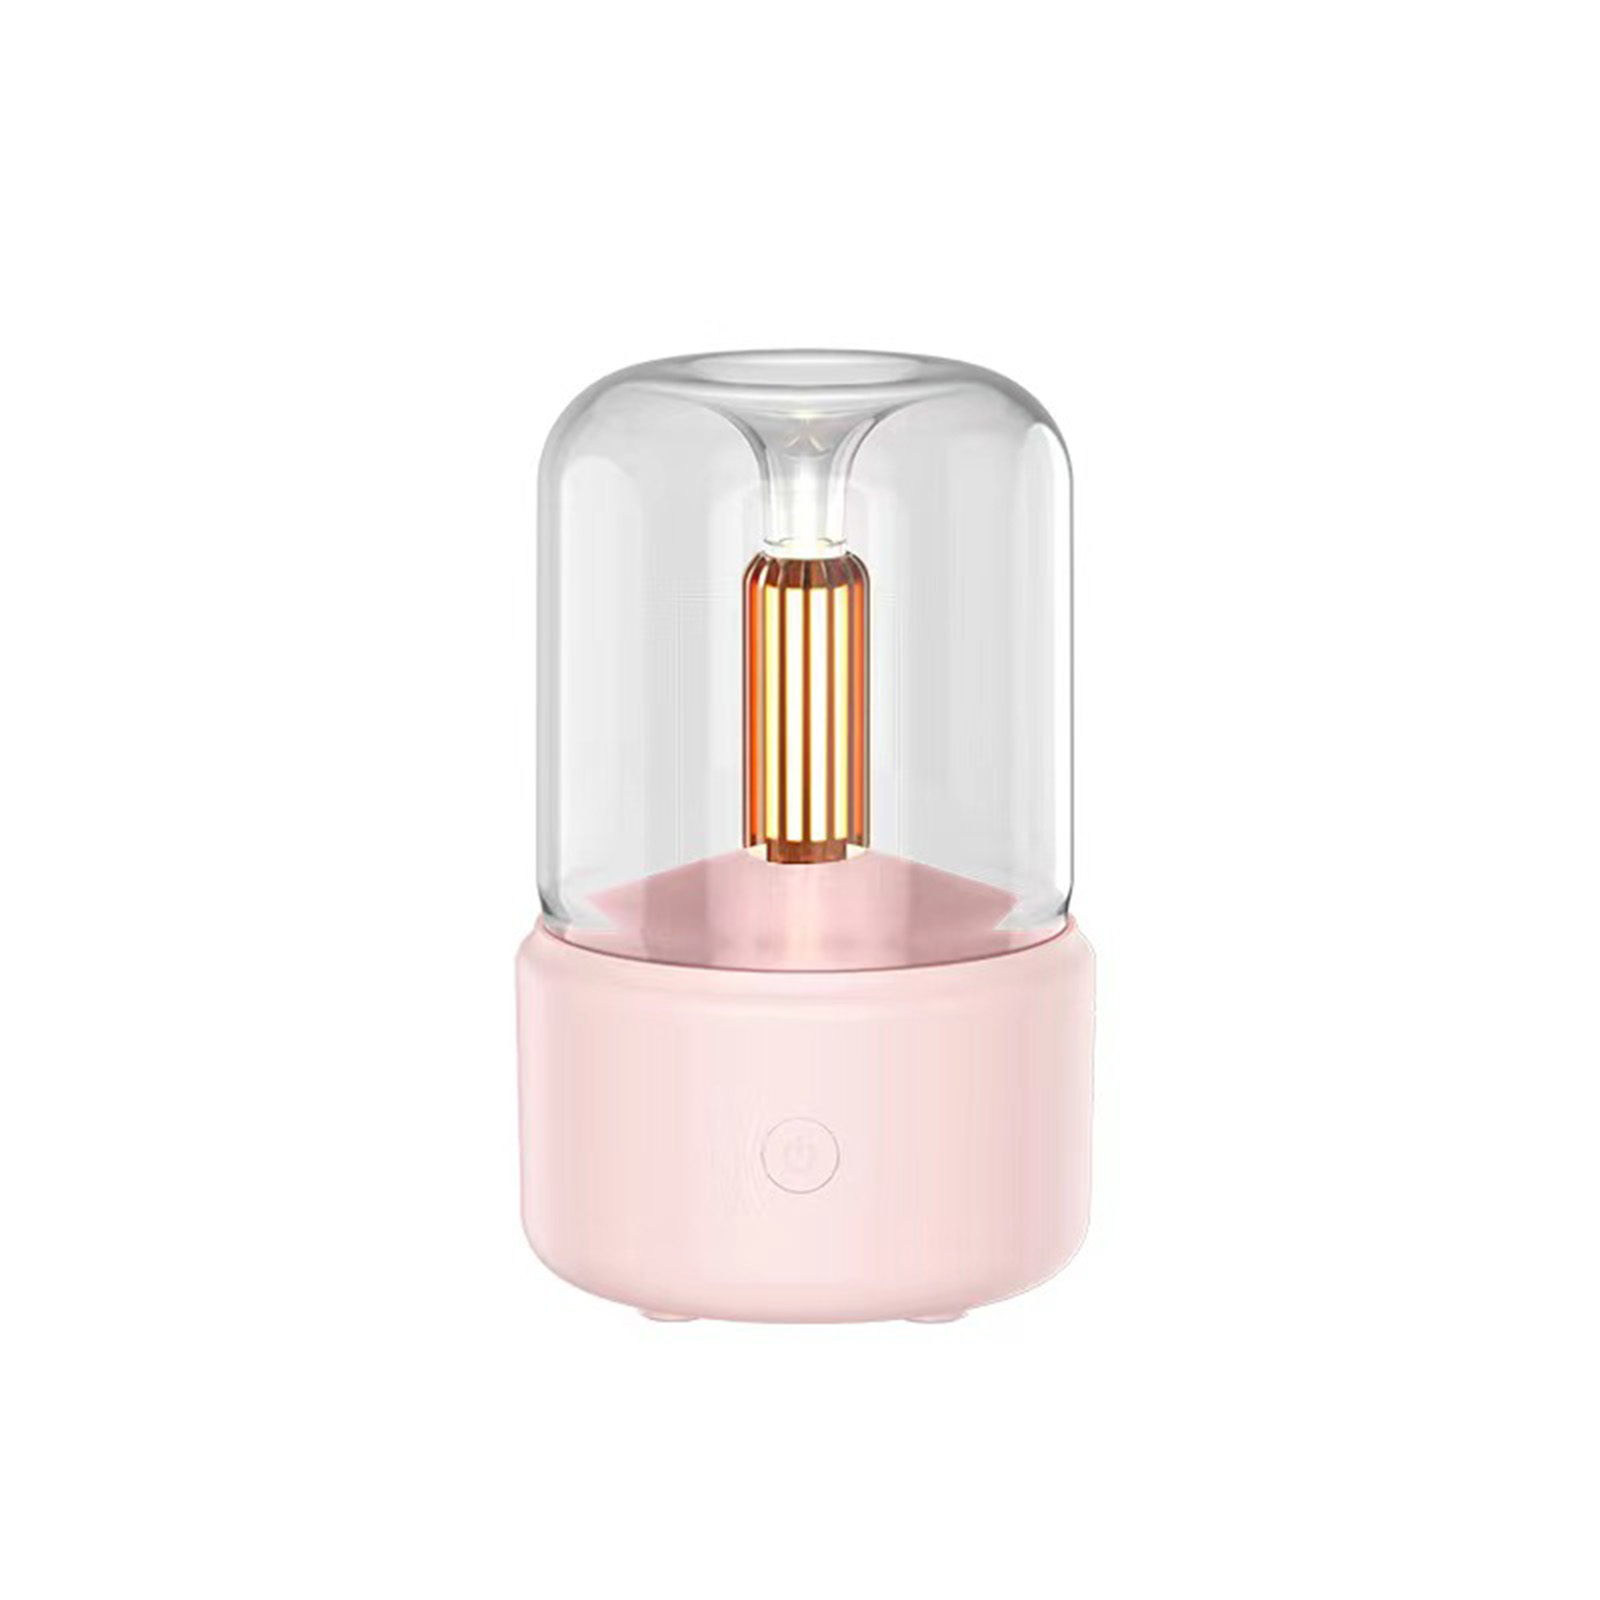 Portable Mini Aroma Diffuser Built-in Intelligent Chip Auto Power-off Protection USB Mini Humidifier Essential Oil Night Light For Home Office Bedroom